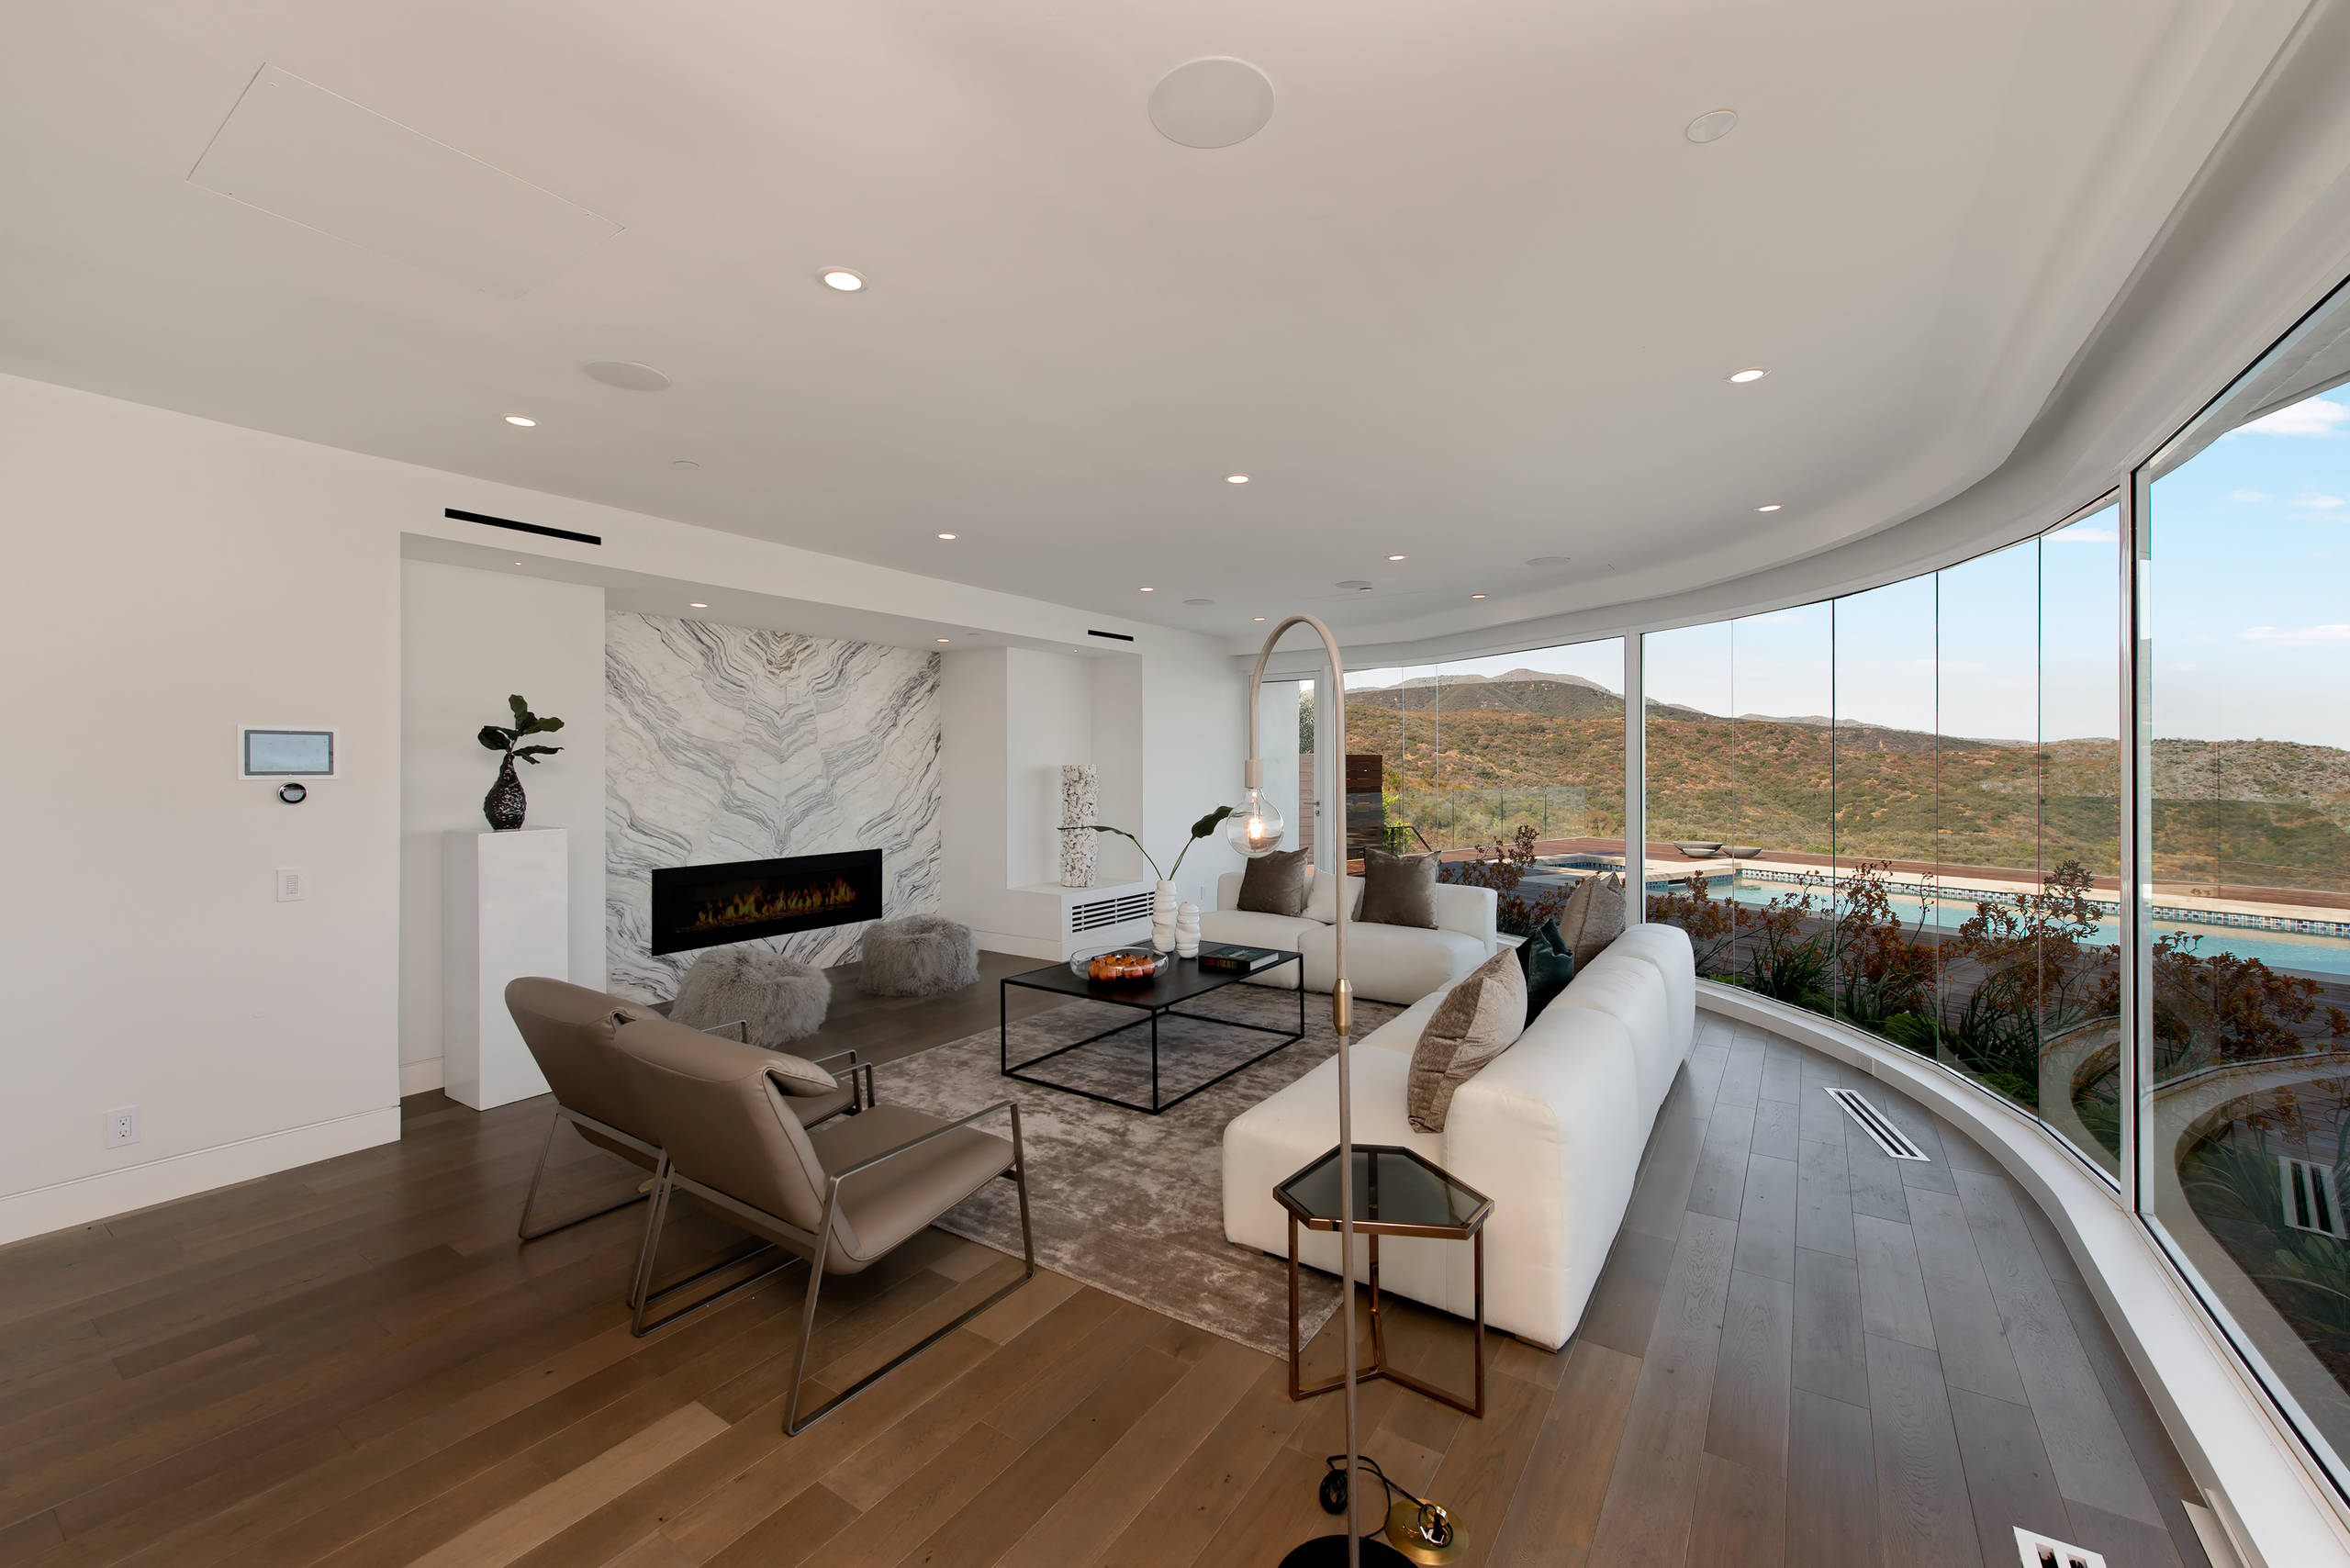 Living room with rounded glass walls